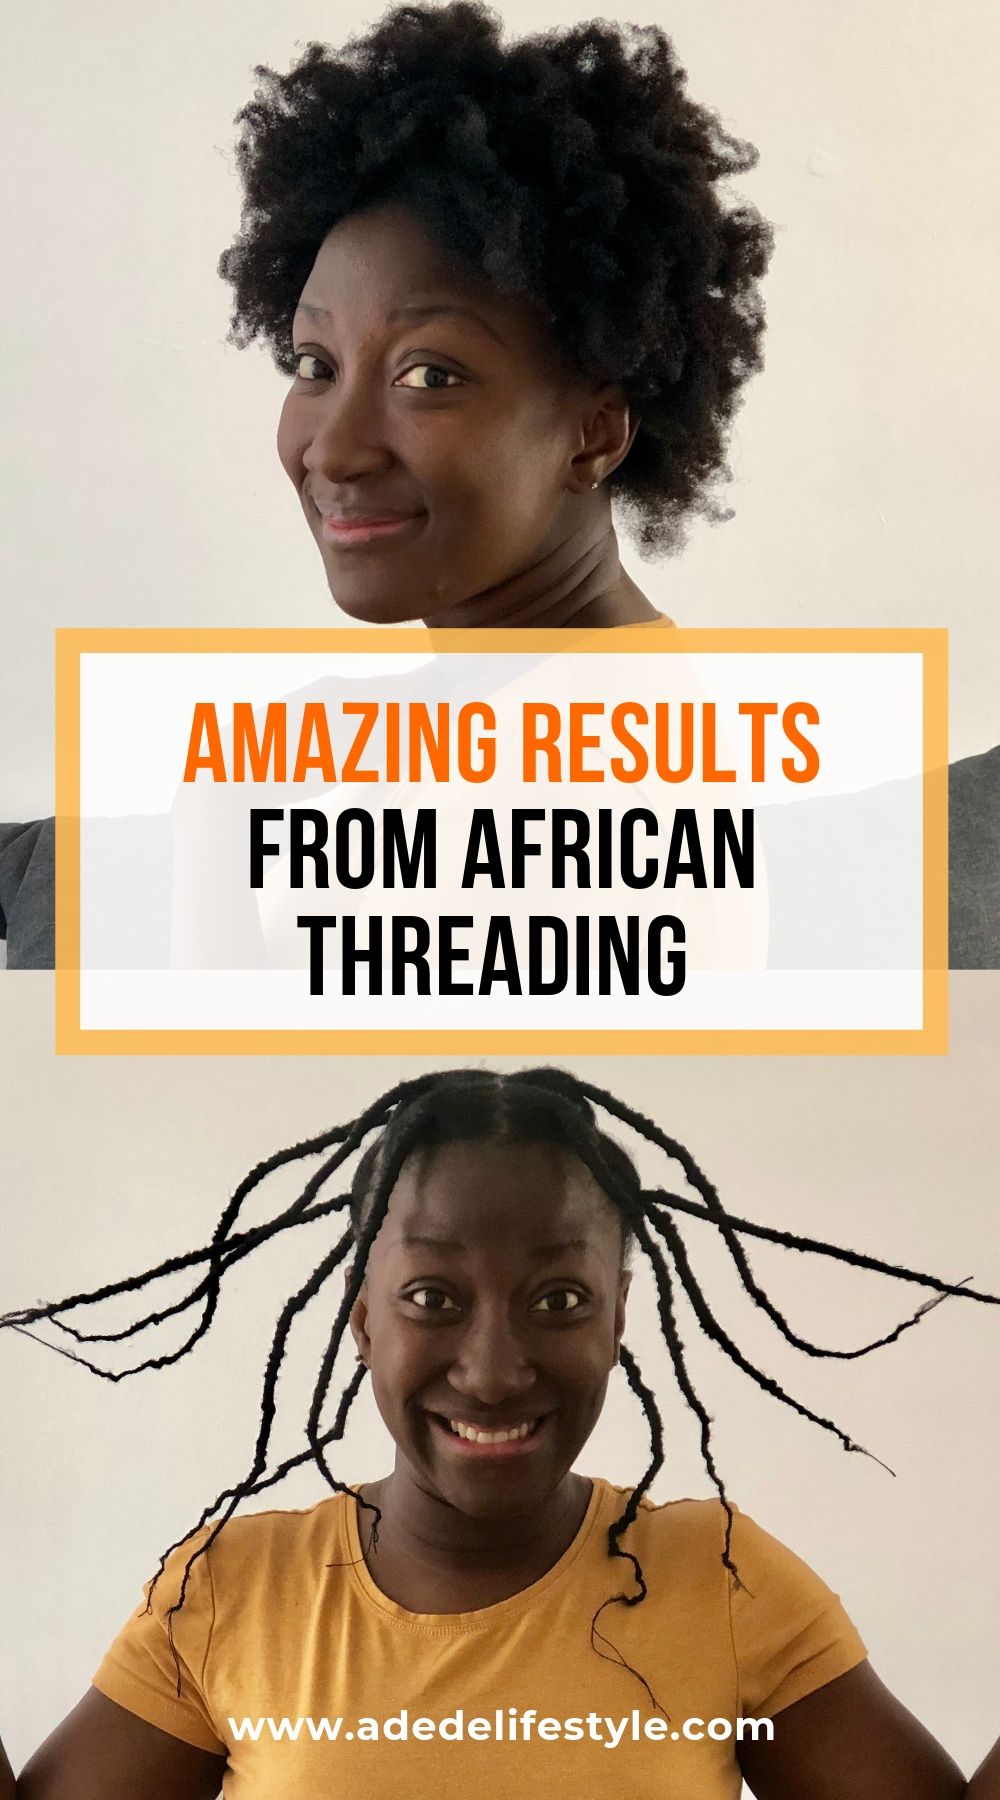 Glory Mtuy - How to:African Threading on natural hair /how... | Facebook